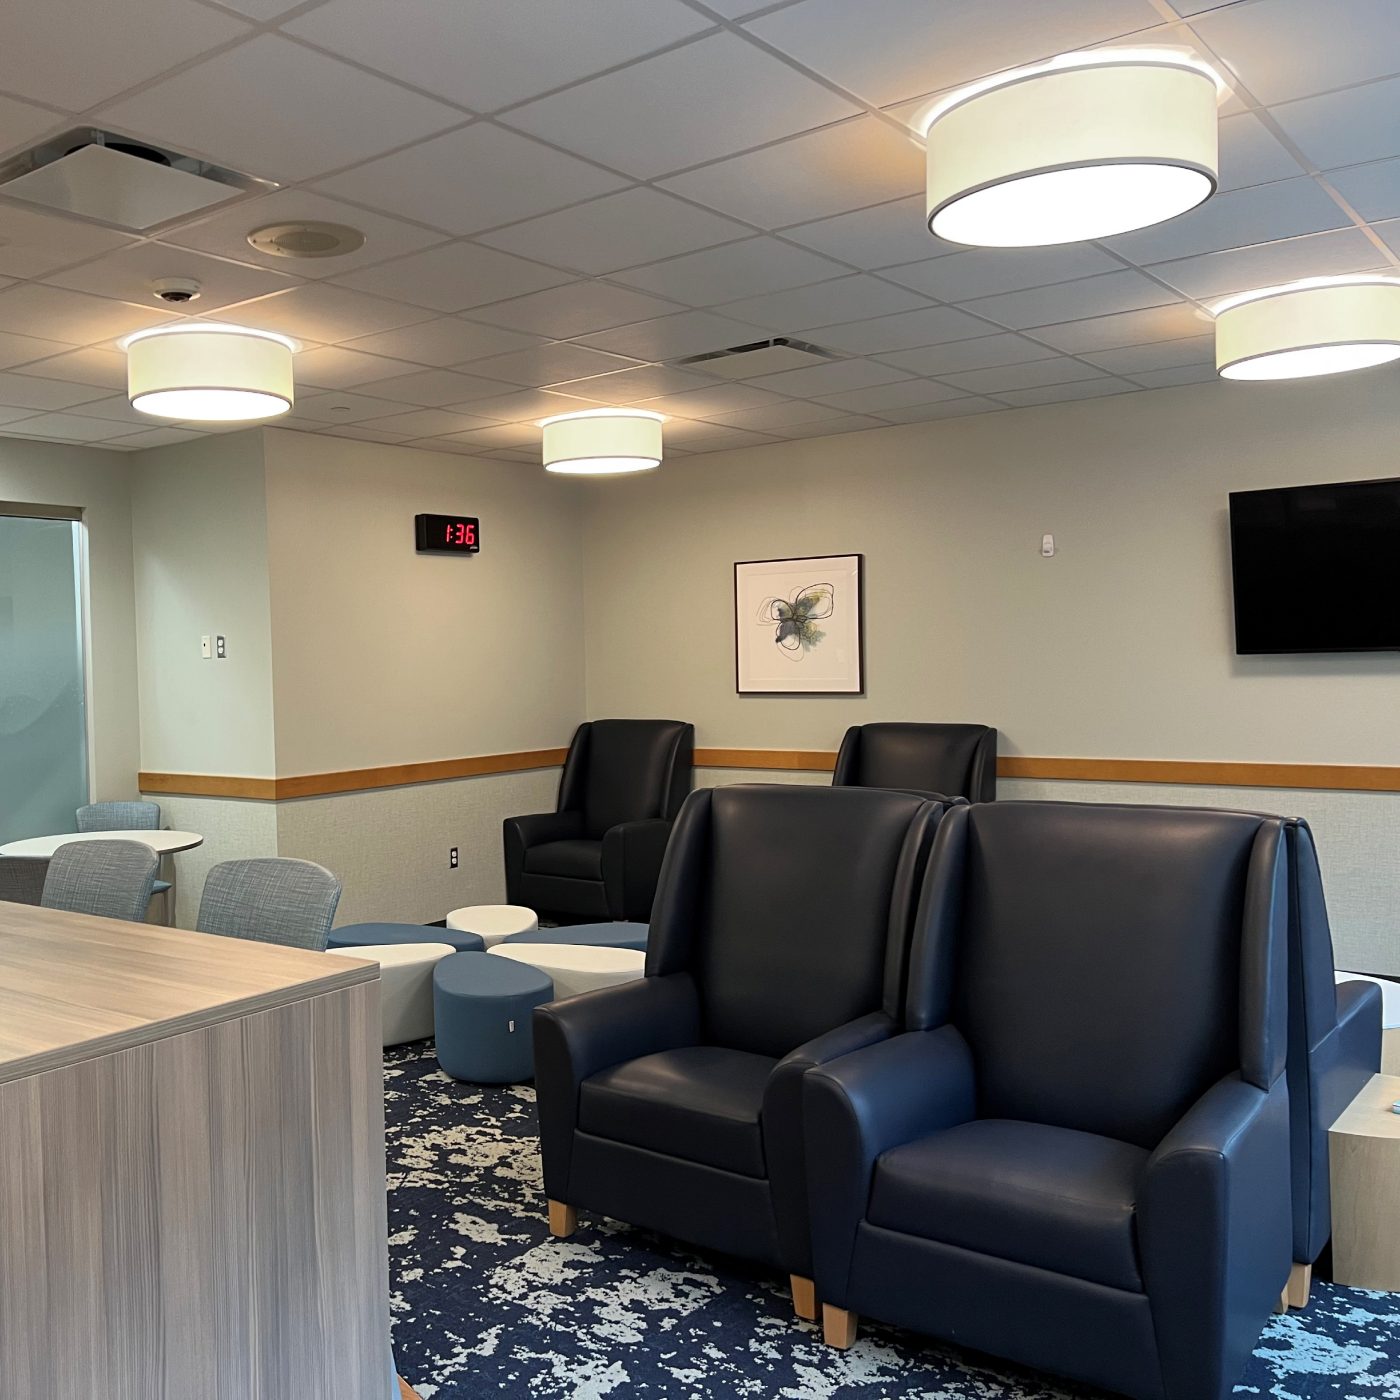 Lumetta’s 23” Surface Mounted Drum Fixtures Cast a Feeling of Comfort and Warmth at the Sands-Constellation Center for Critical CareJune 2022